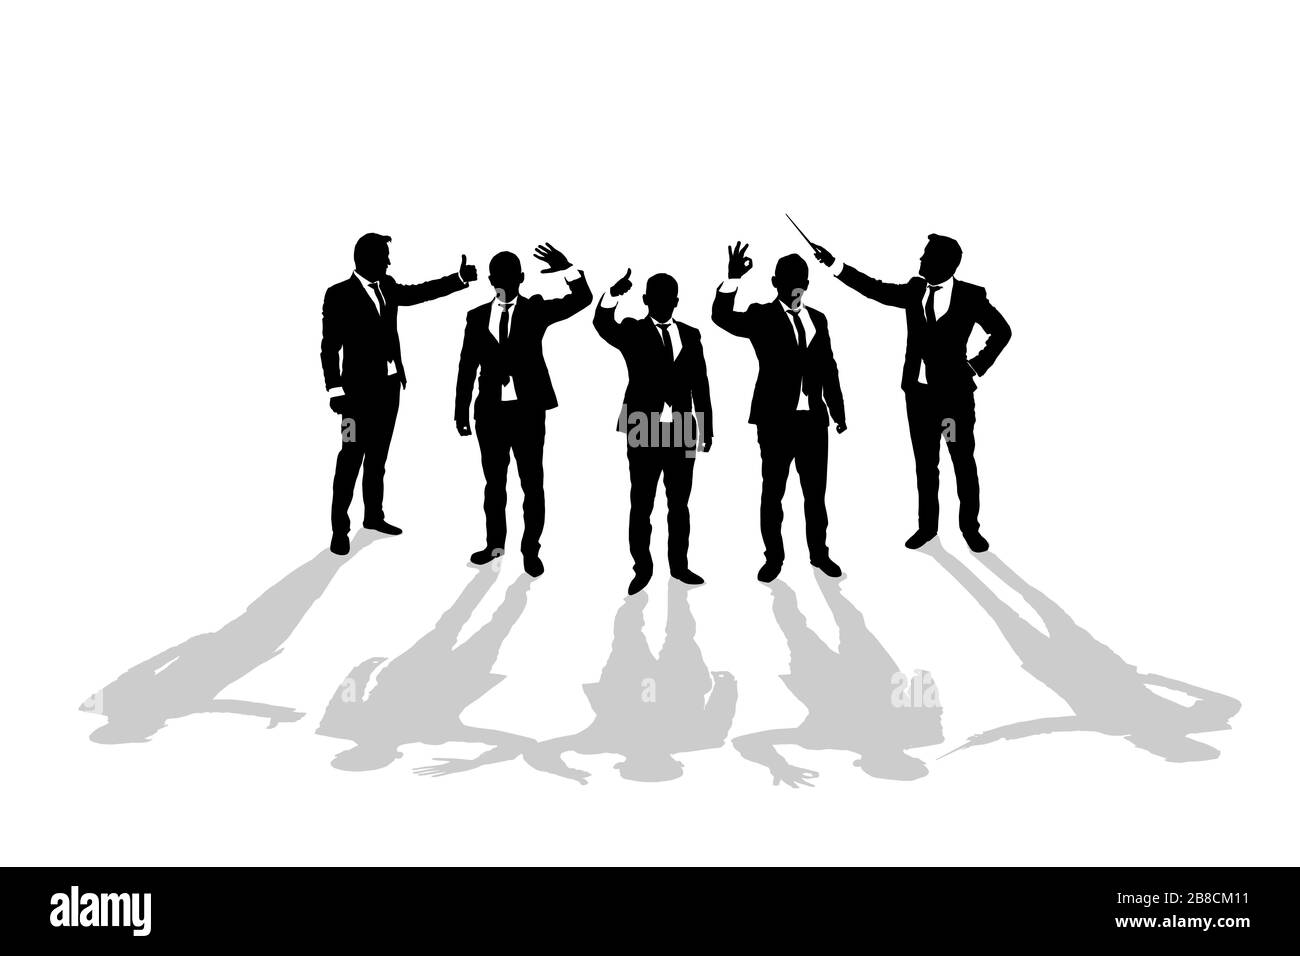 Various business man silhouettes over white background Stock Vector